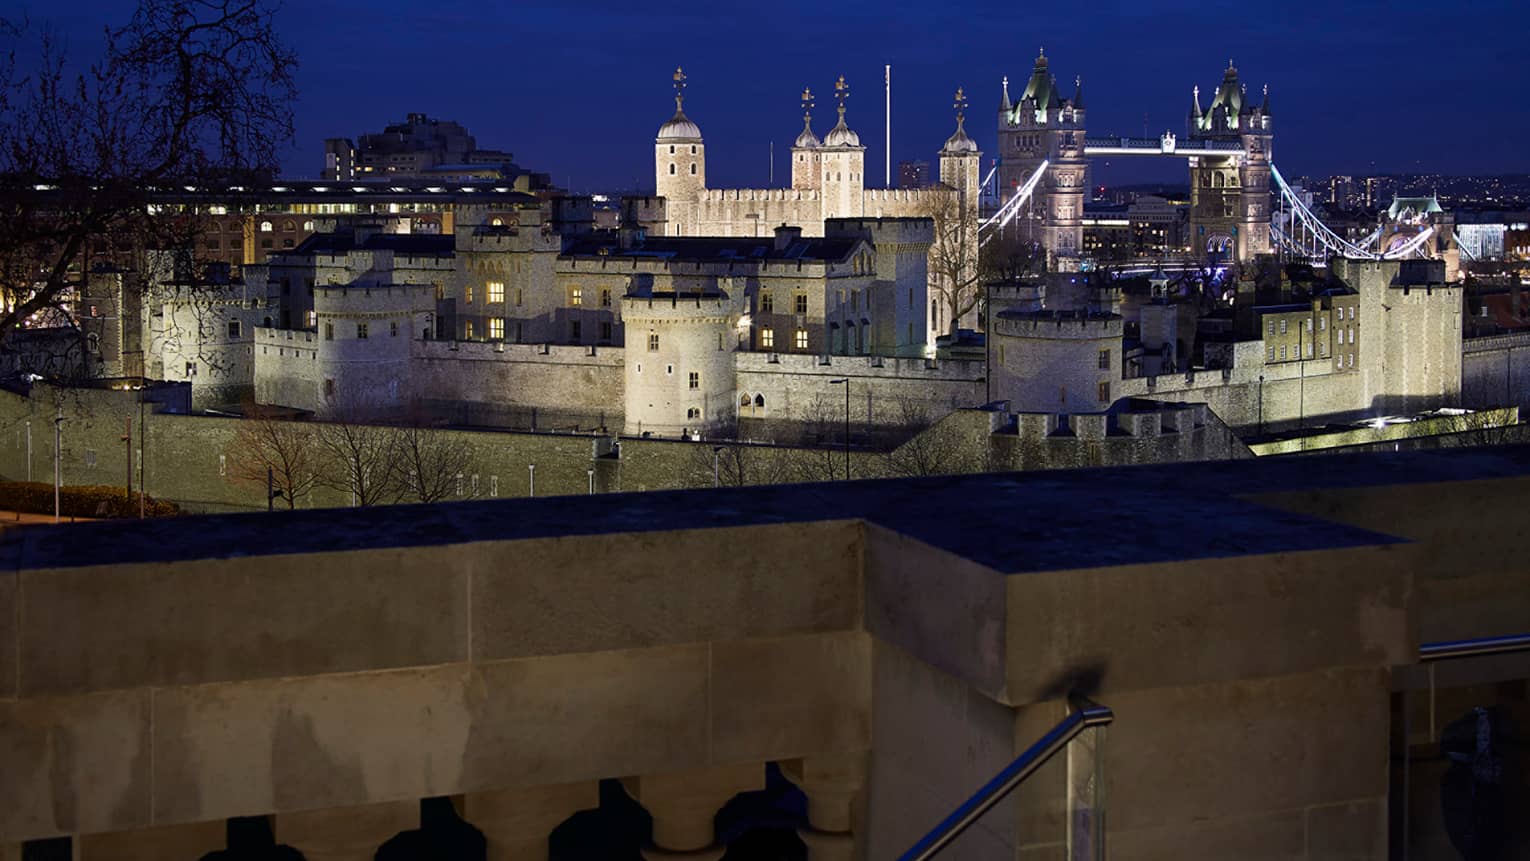 View over wall to Tower Bridge and the Tower of London at night